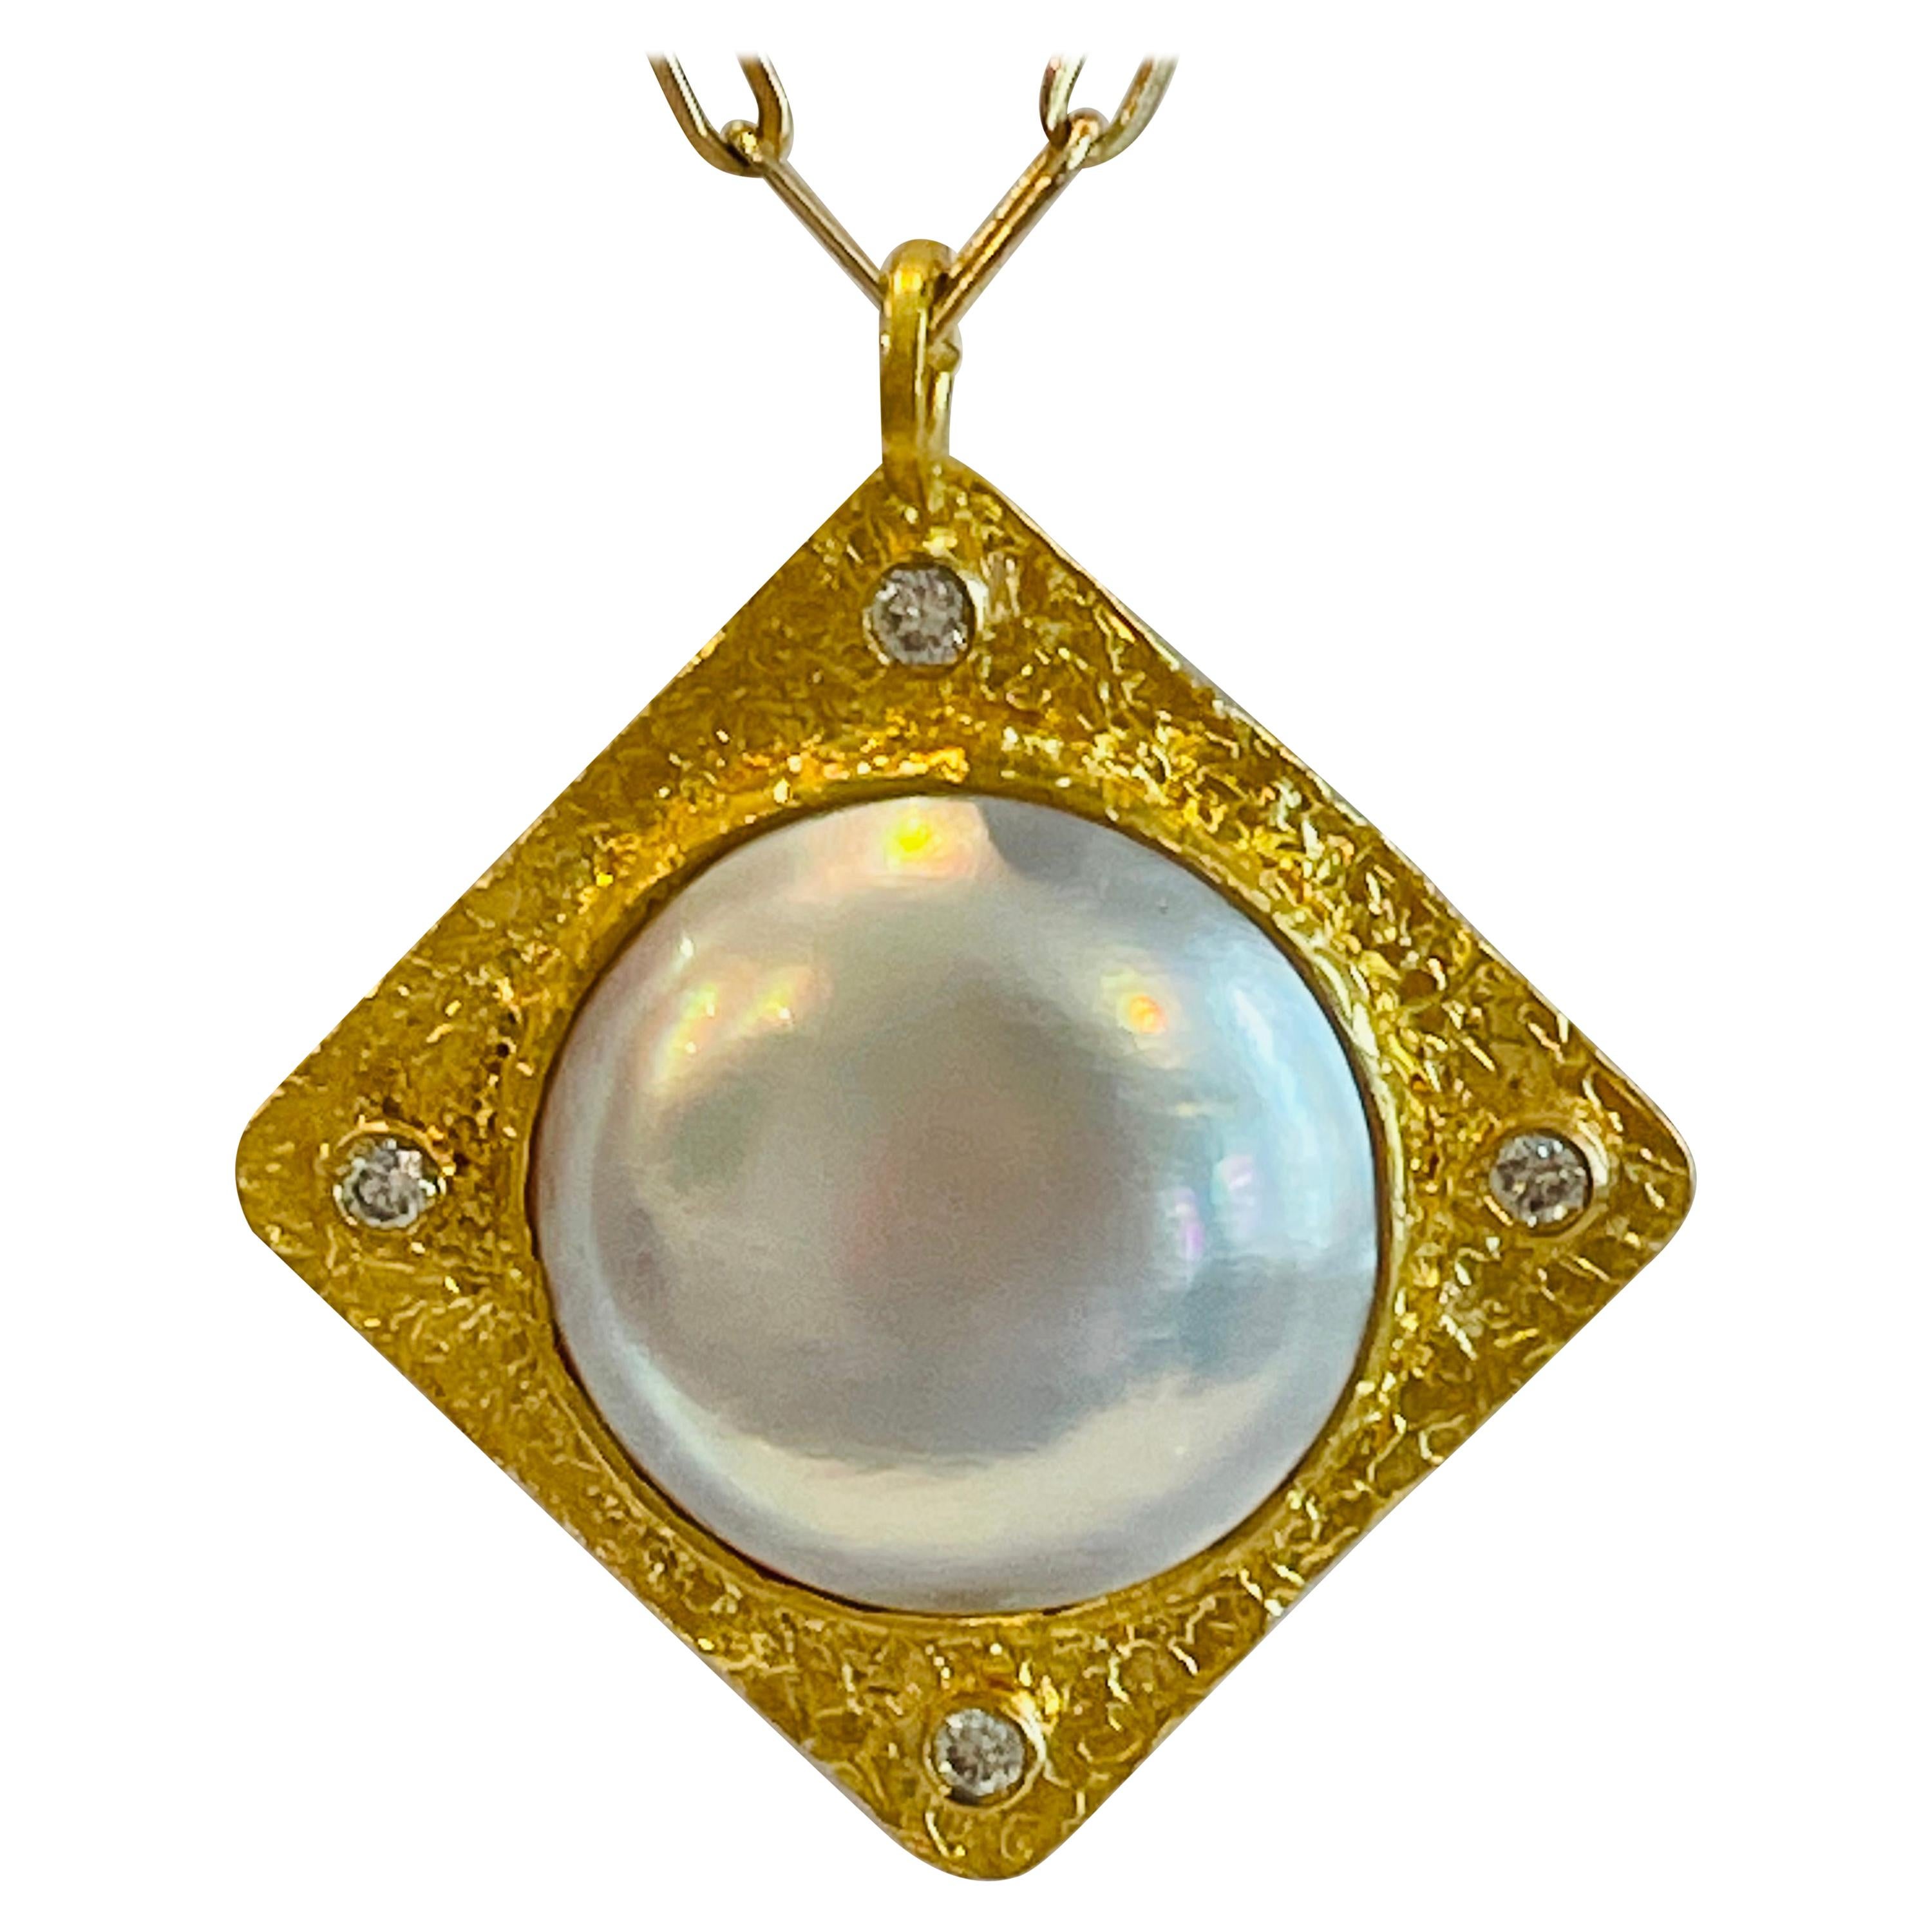 22k Pearl and Diamond Pendant Necklace by Tagili